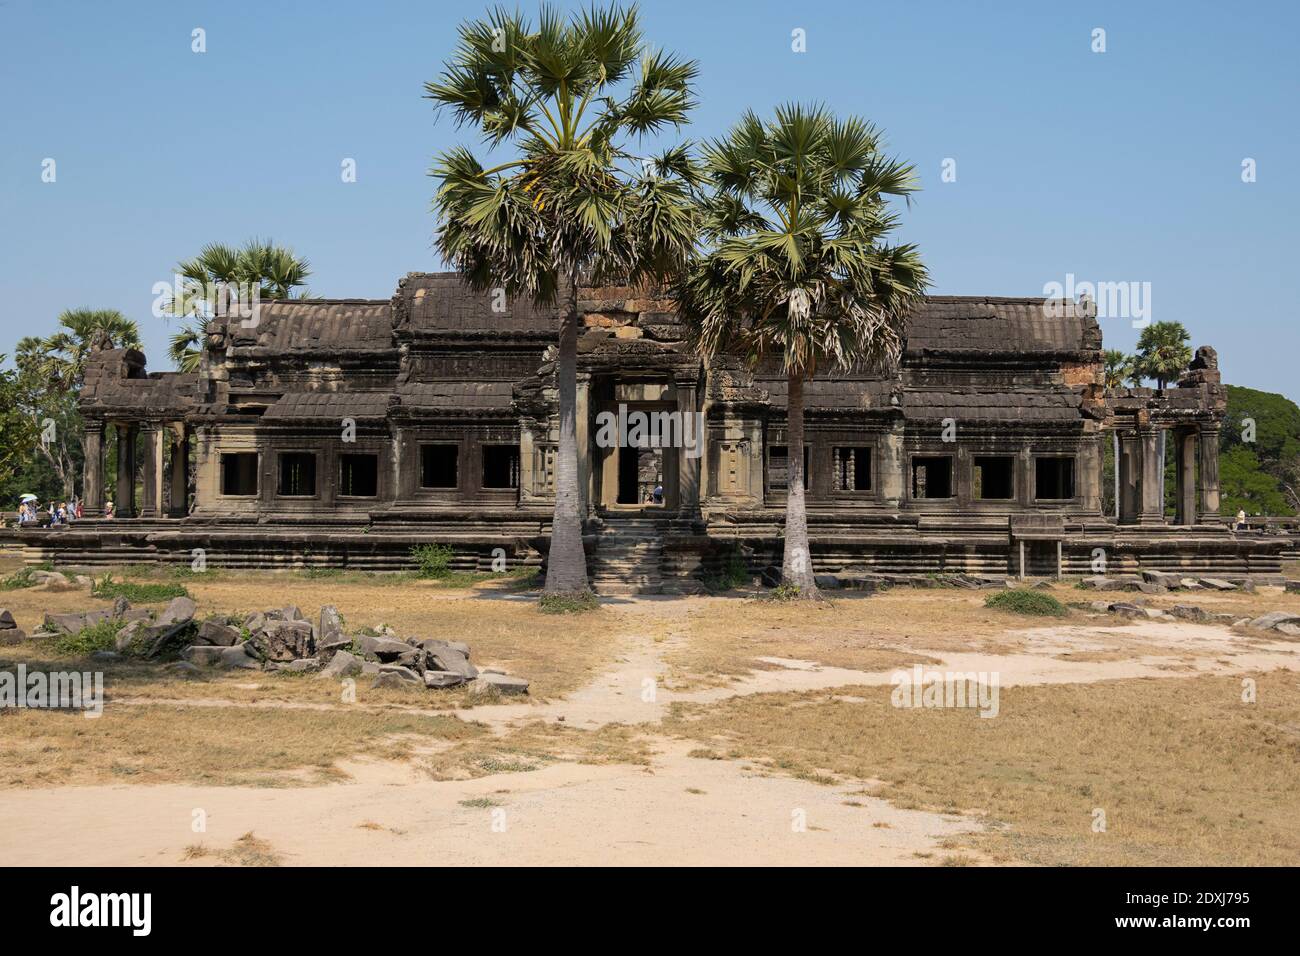 Palm trees outside one of the temples of Angkor Wat Stock Photo